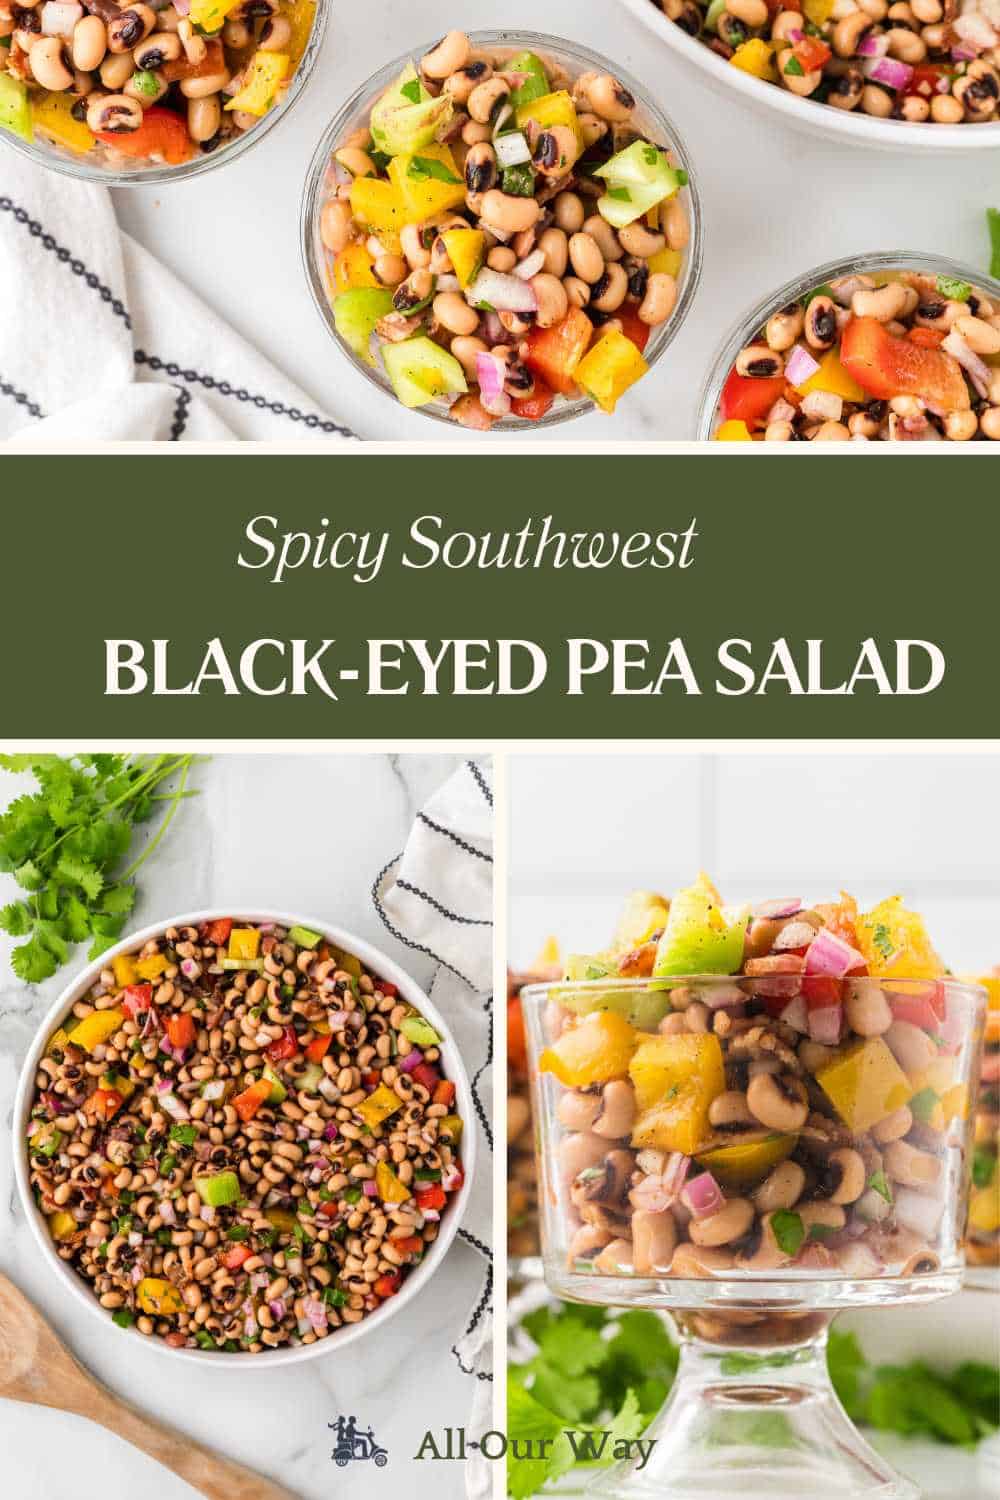 Add a delicious twist to your salad game with this family-favorite Marinated Black-eyed Pea Salad! Bursting with flavors from colorful bell peppers, jalapeños, red onion, a zesty wine vinaigrette, and crispy bacon crumbles. Get the recipe for this summer potluck winner and step up your salad game today.